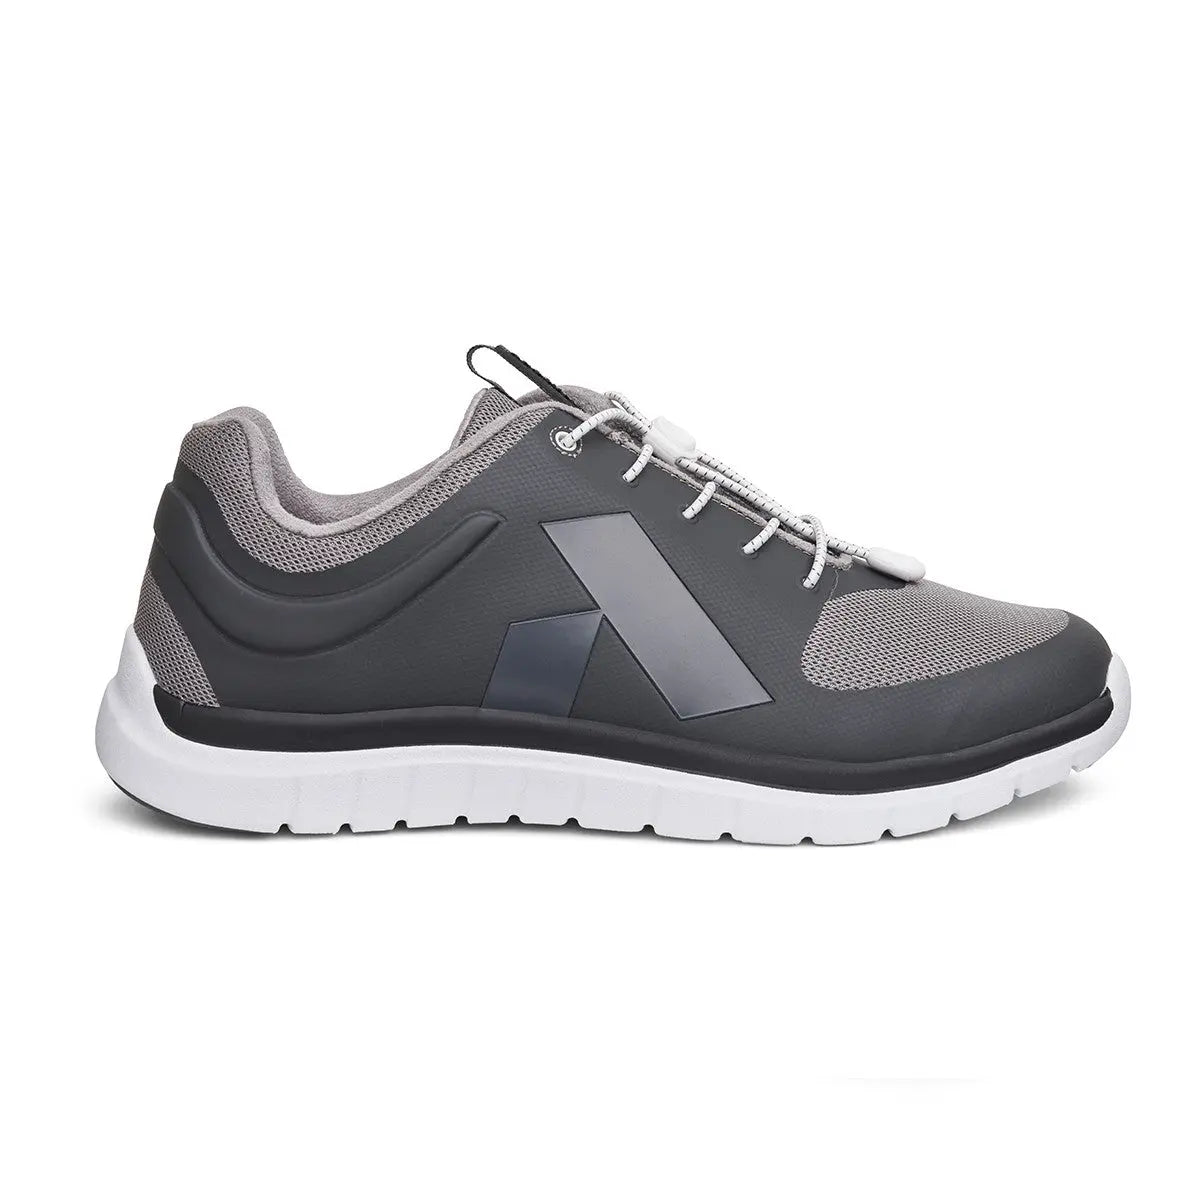 Anodyne Men's No.22 Sport Runner - Grey is treated with anti-microbial to keep shoe healthy